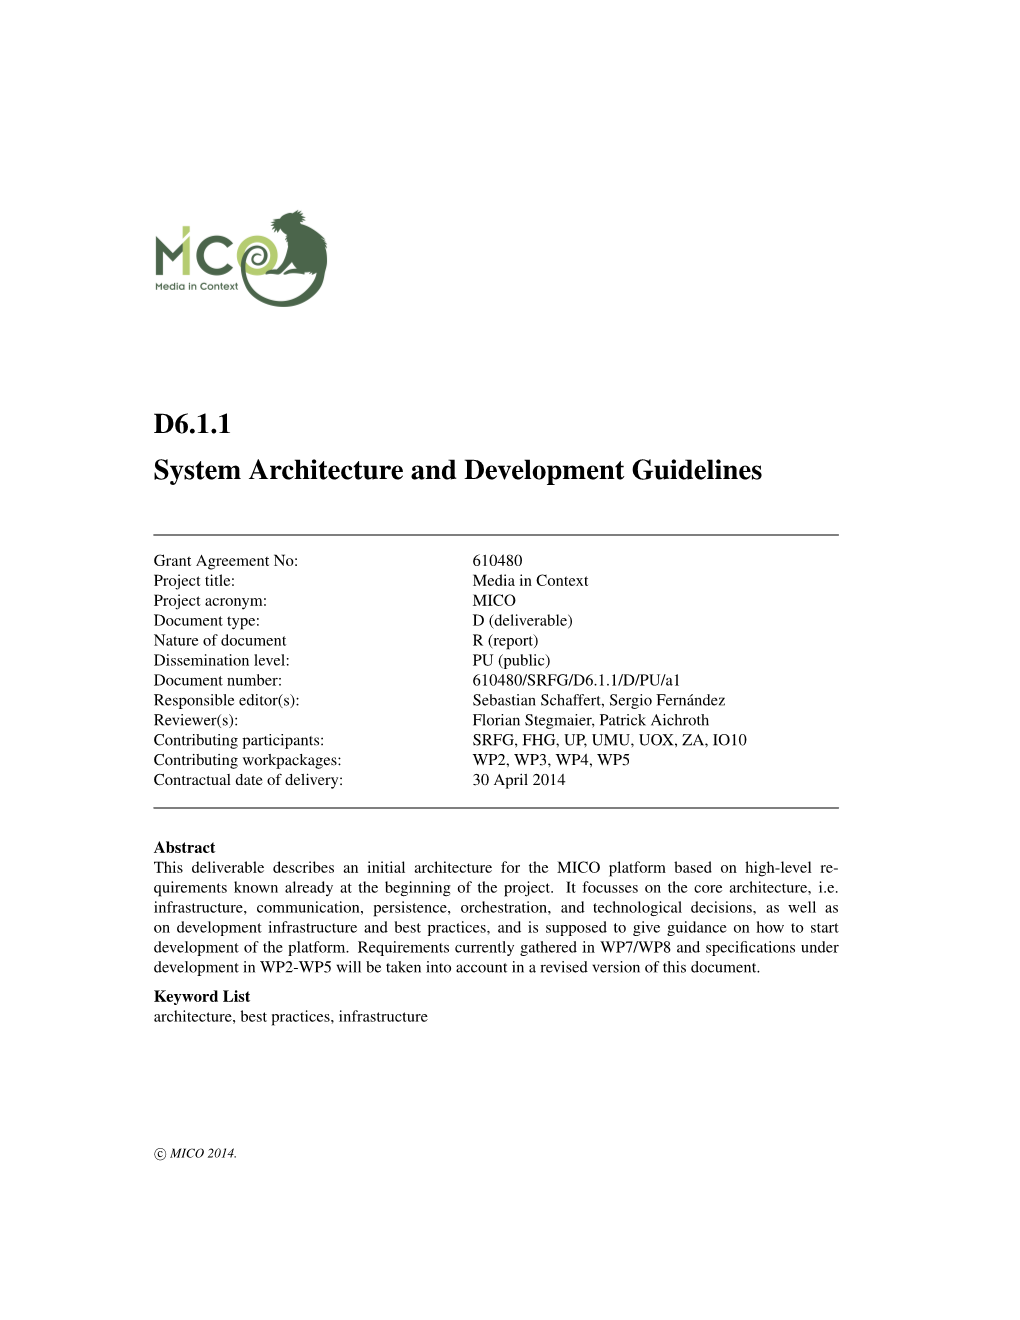 D6.1.1 System Architecture and Development Guidelines